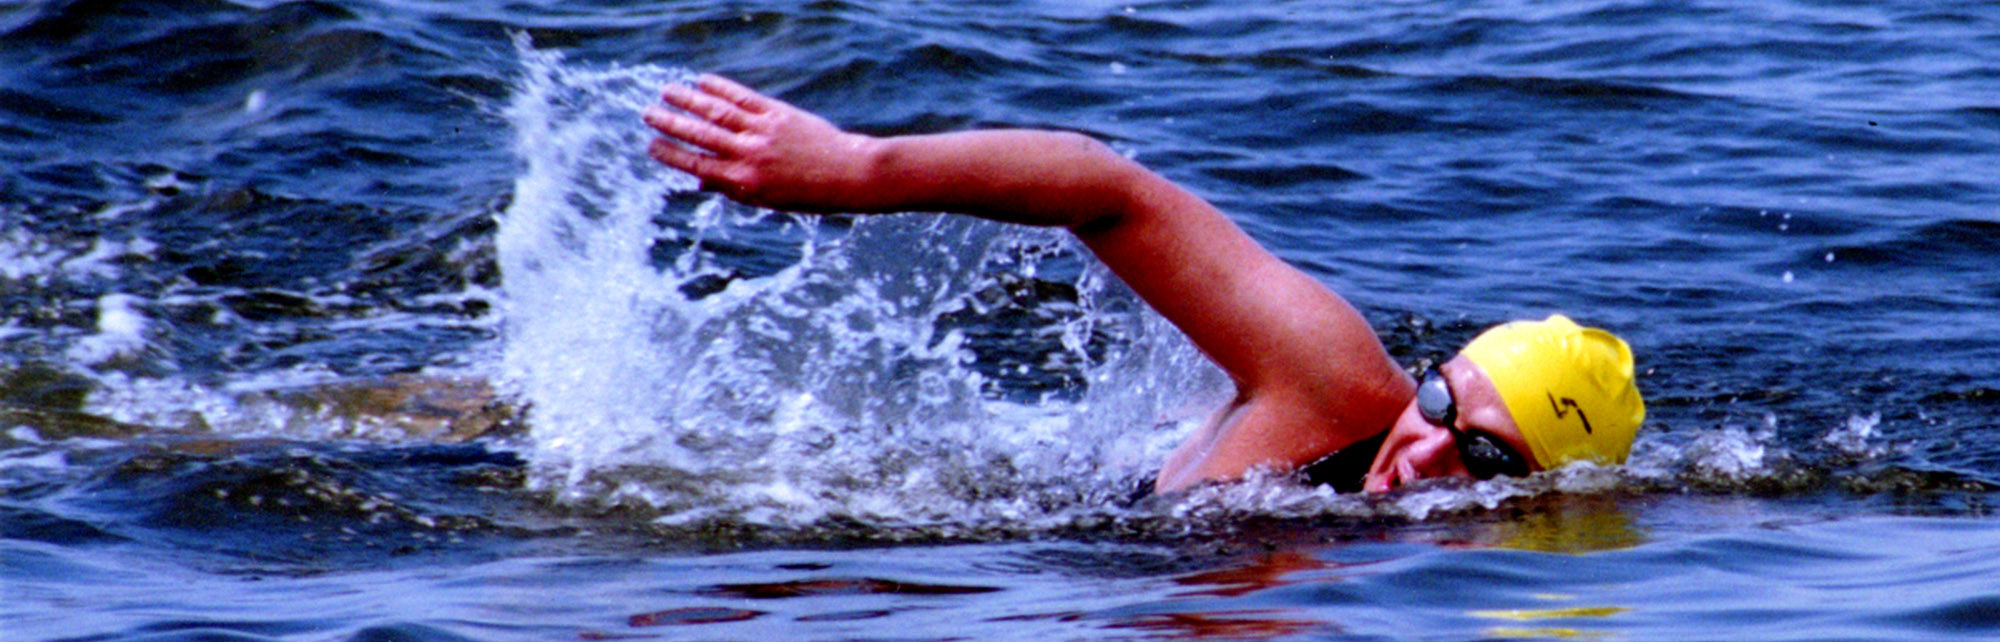 The profile of a person swimming with their right arm out of the water.